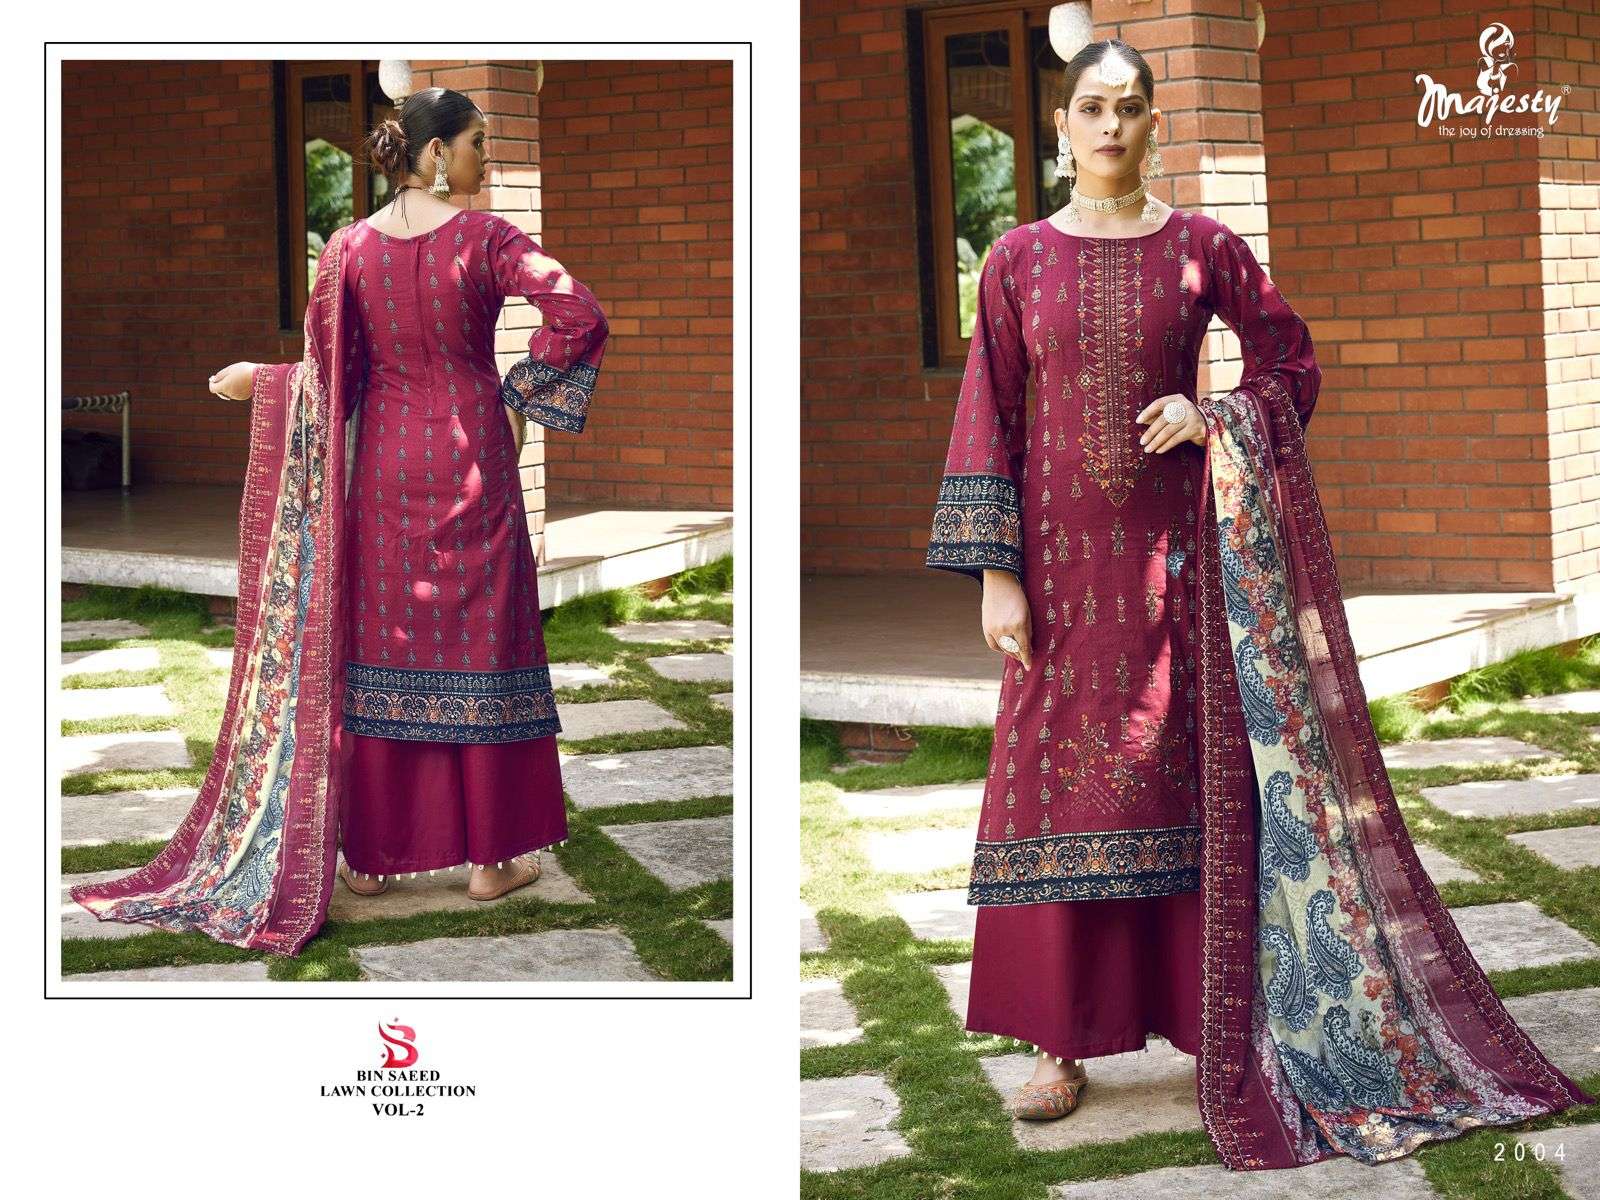  MAJESTY BIN SAEED LAWN COLLECTION VOL 2